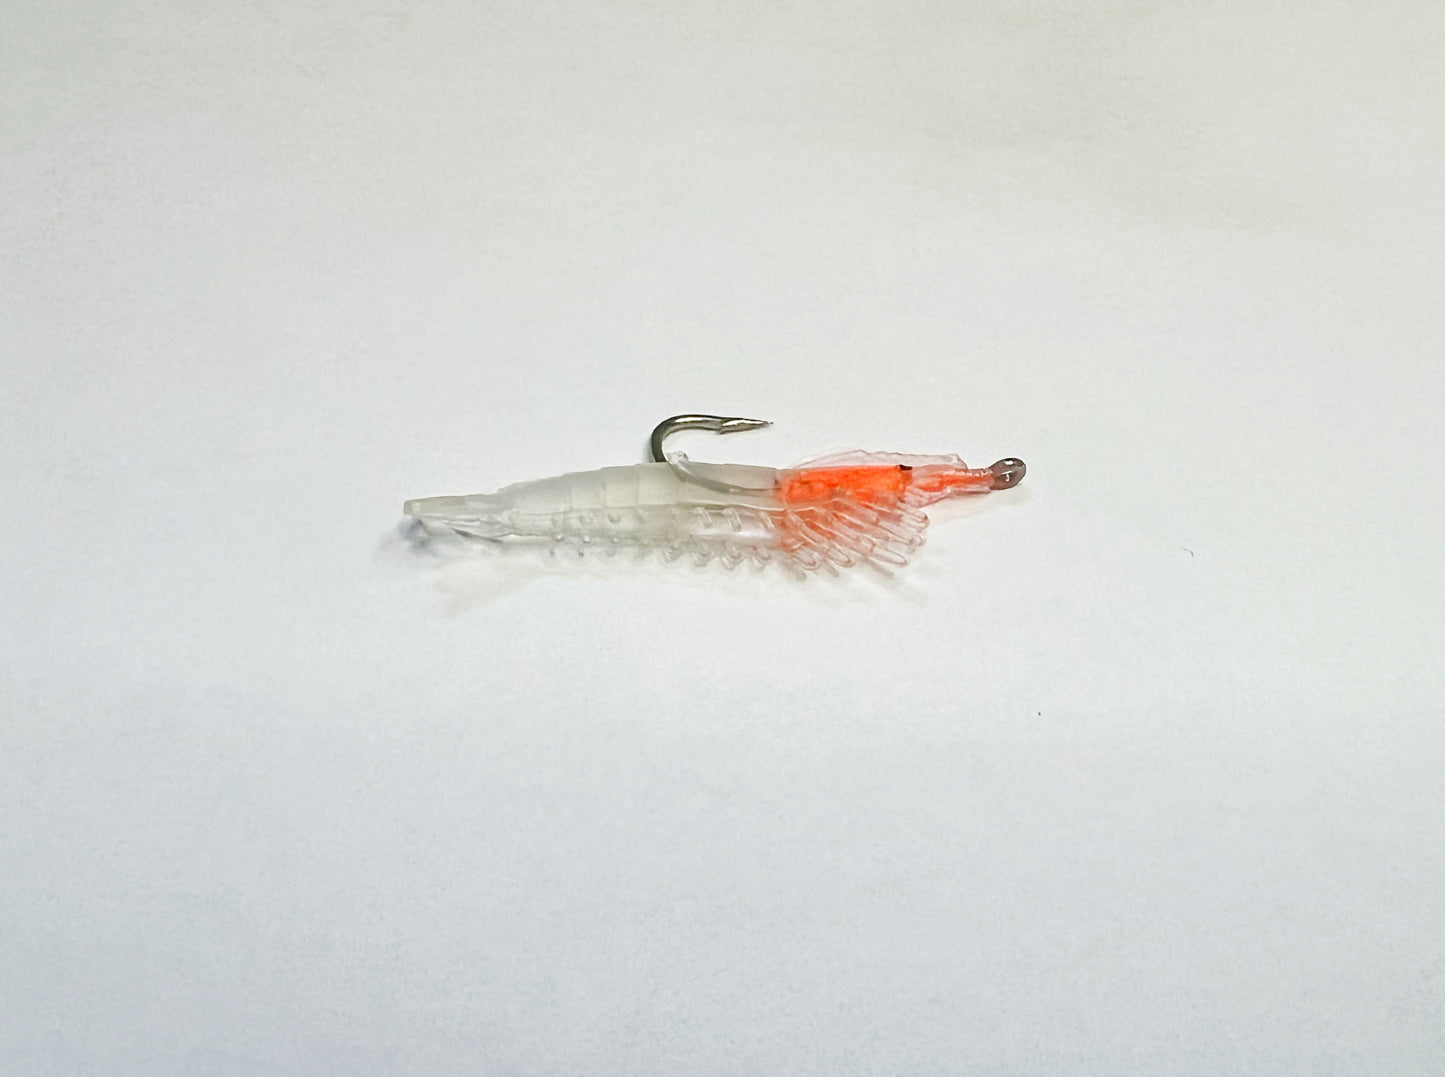 Pre Rigged Weighted Soft Shrimp (1 Piece - Clear)